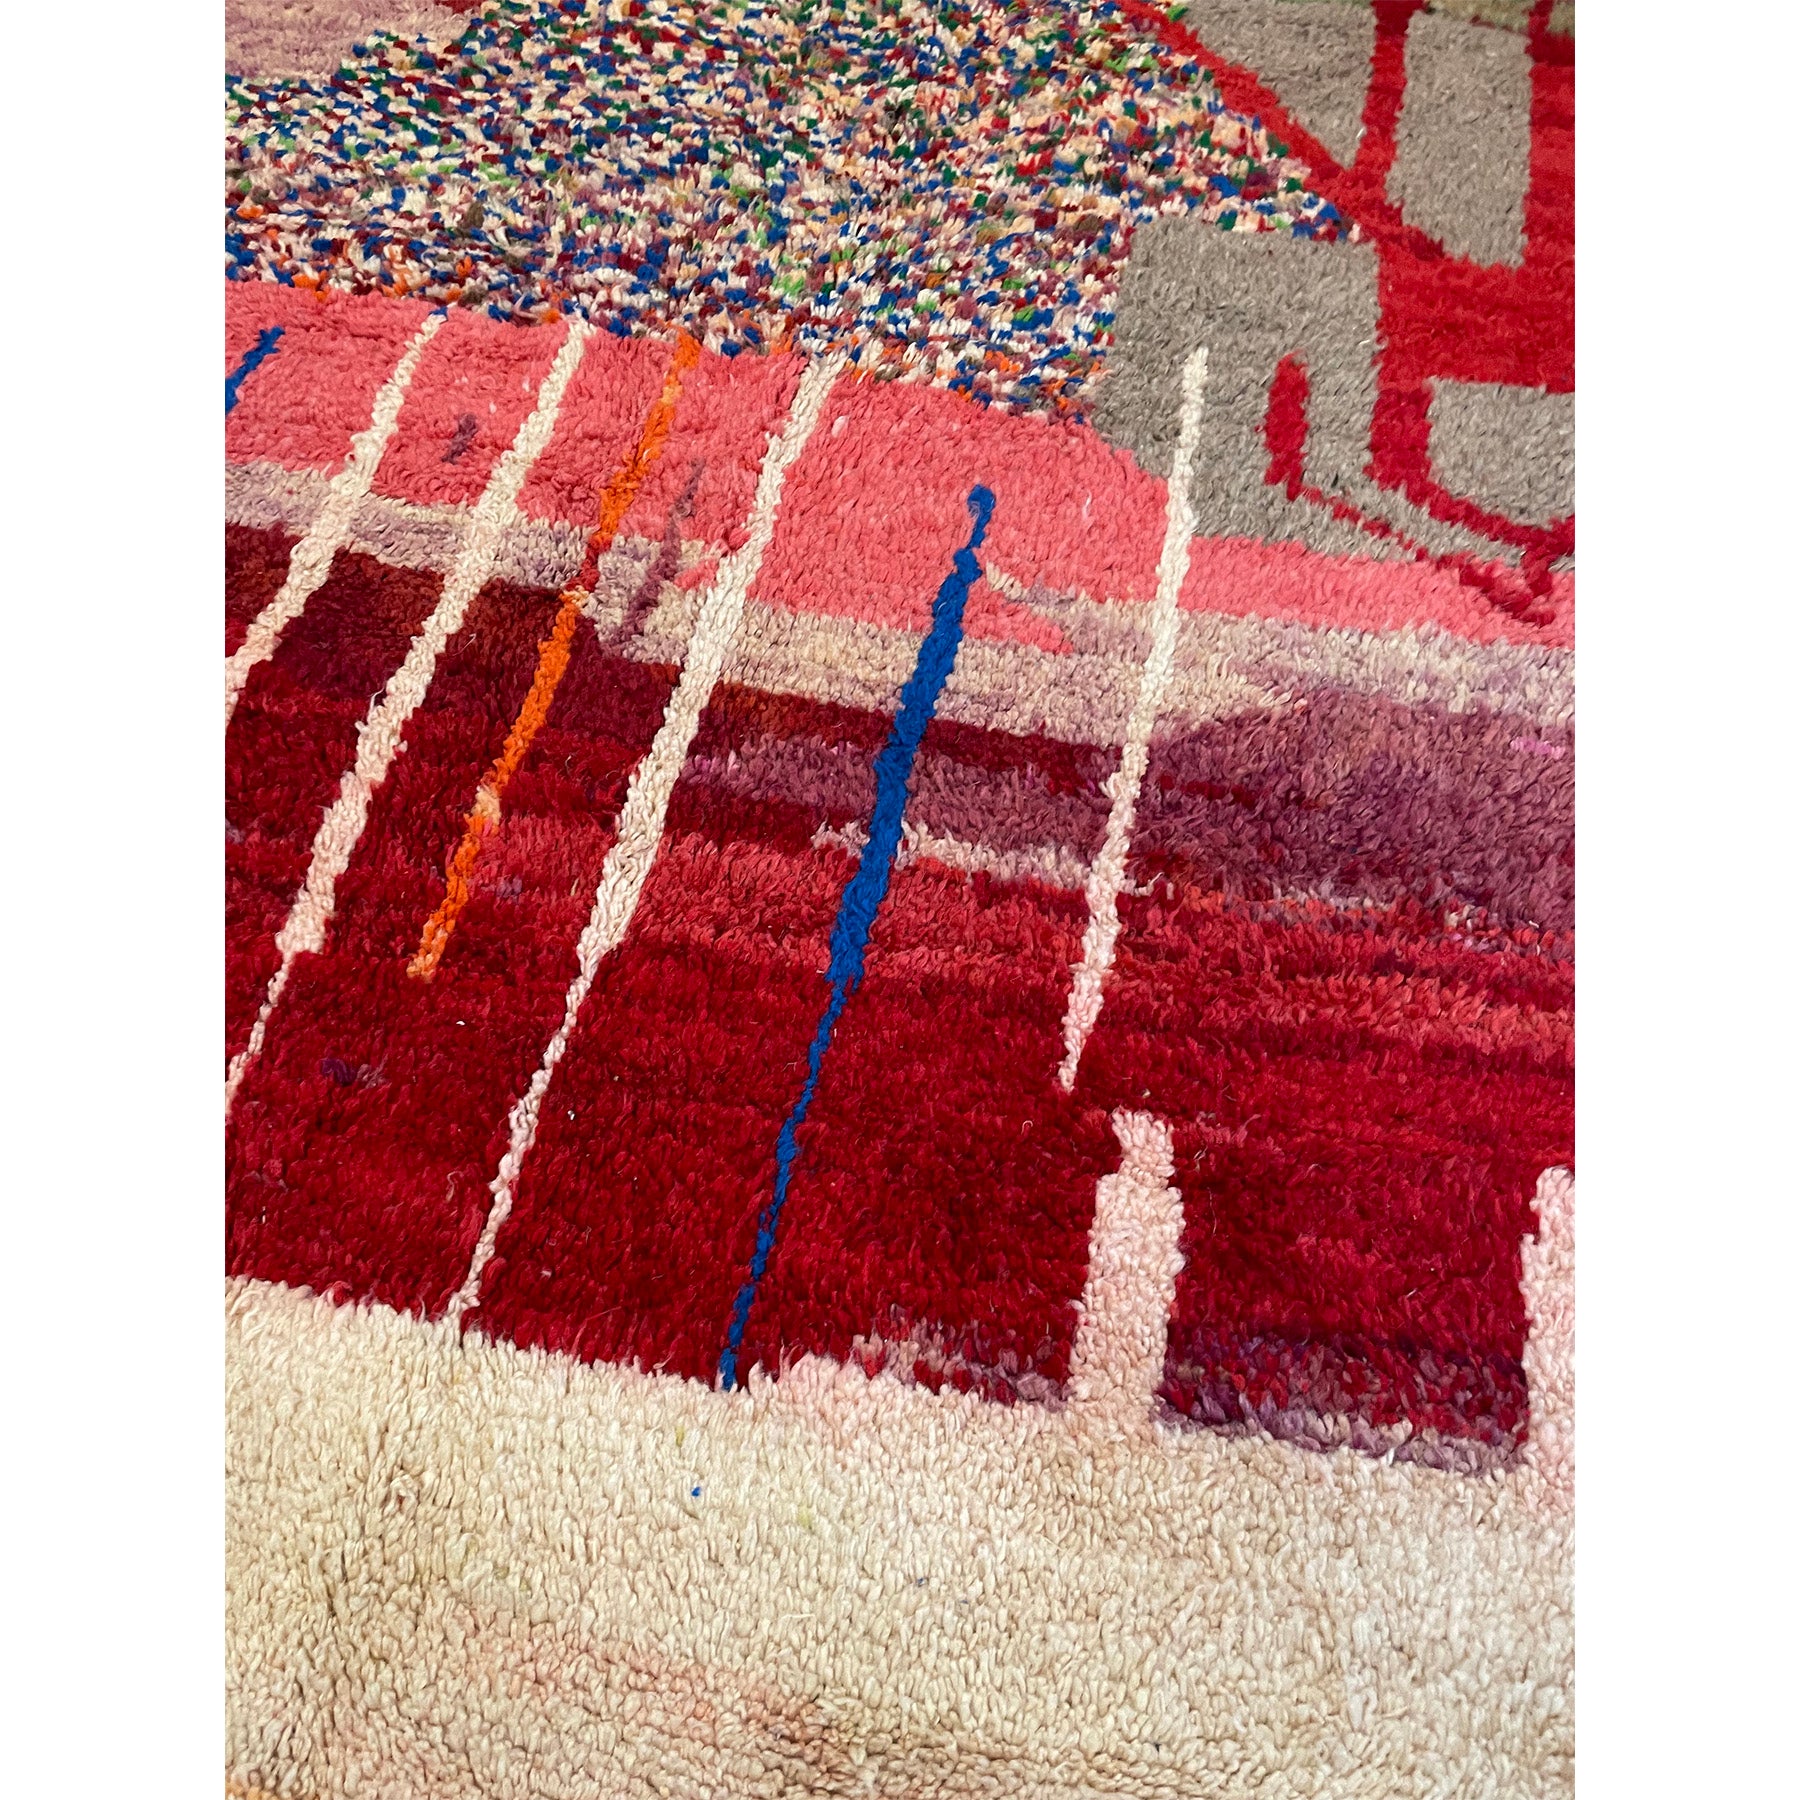 Red, blue, and purple Moroccan pile rug with abstract design - Kantara | Moroccan Rugs